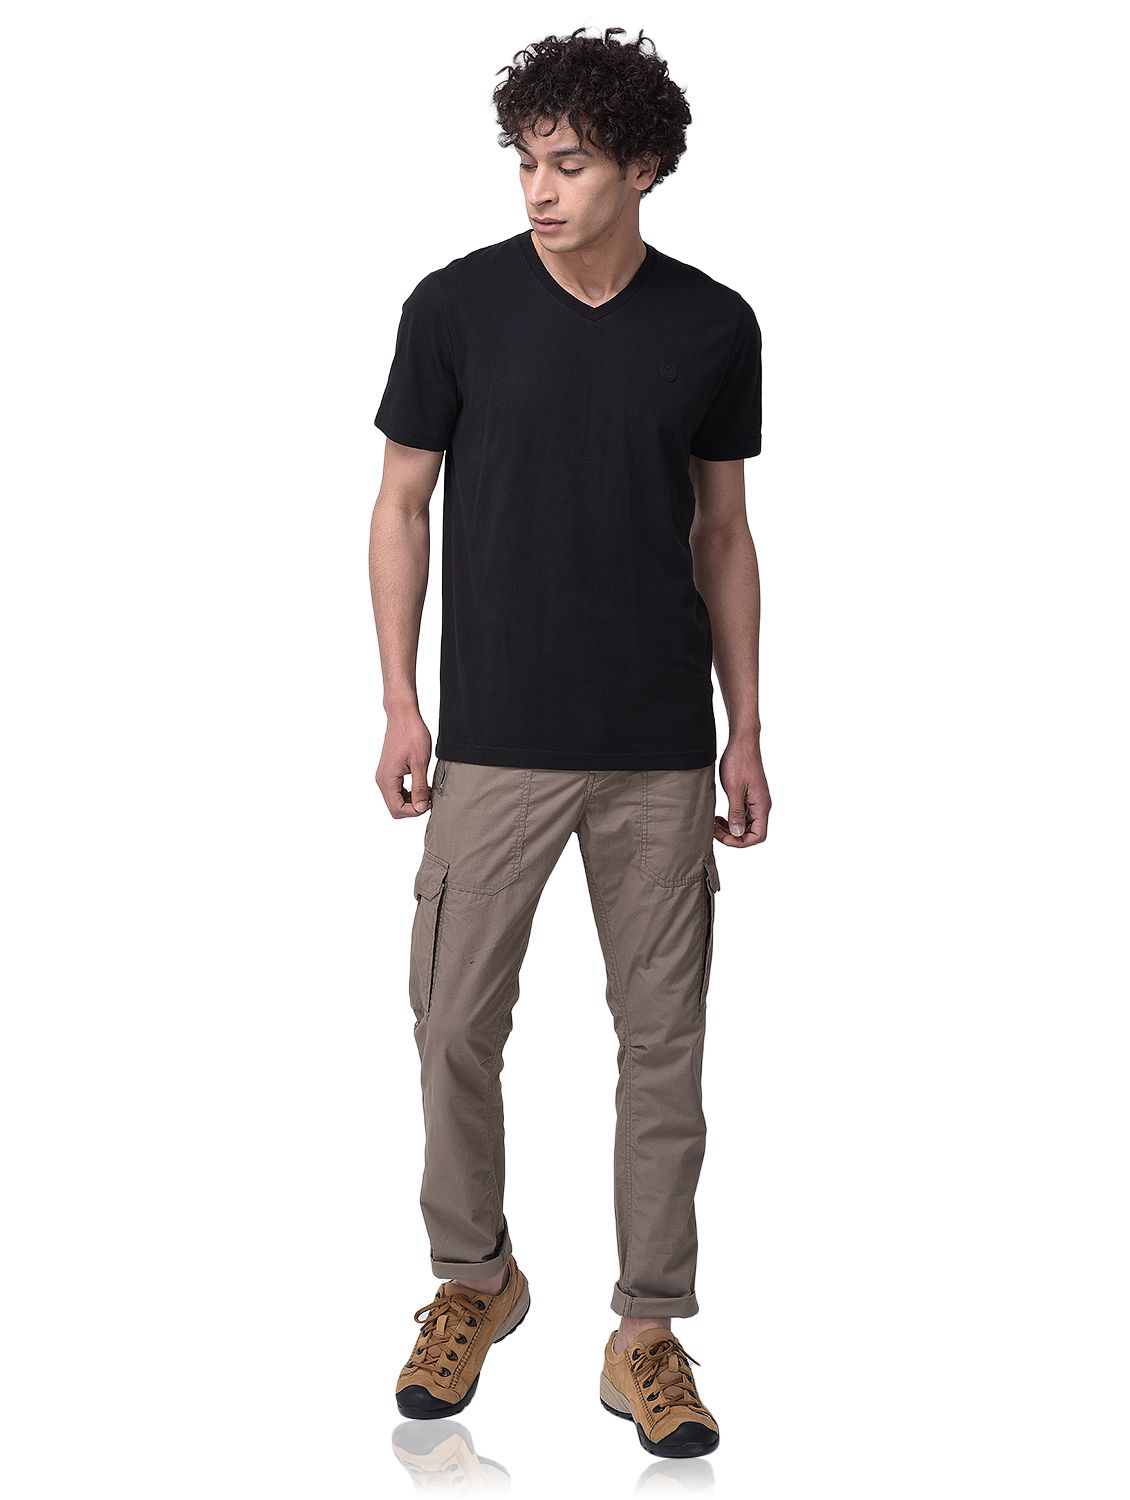 Latest Woodland Trousers & Lowers arrivals - Men - 1 products | FASHIOLA  INDIA